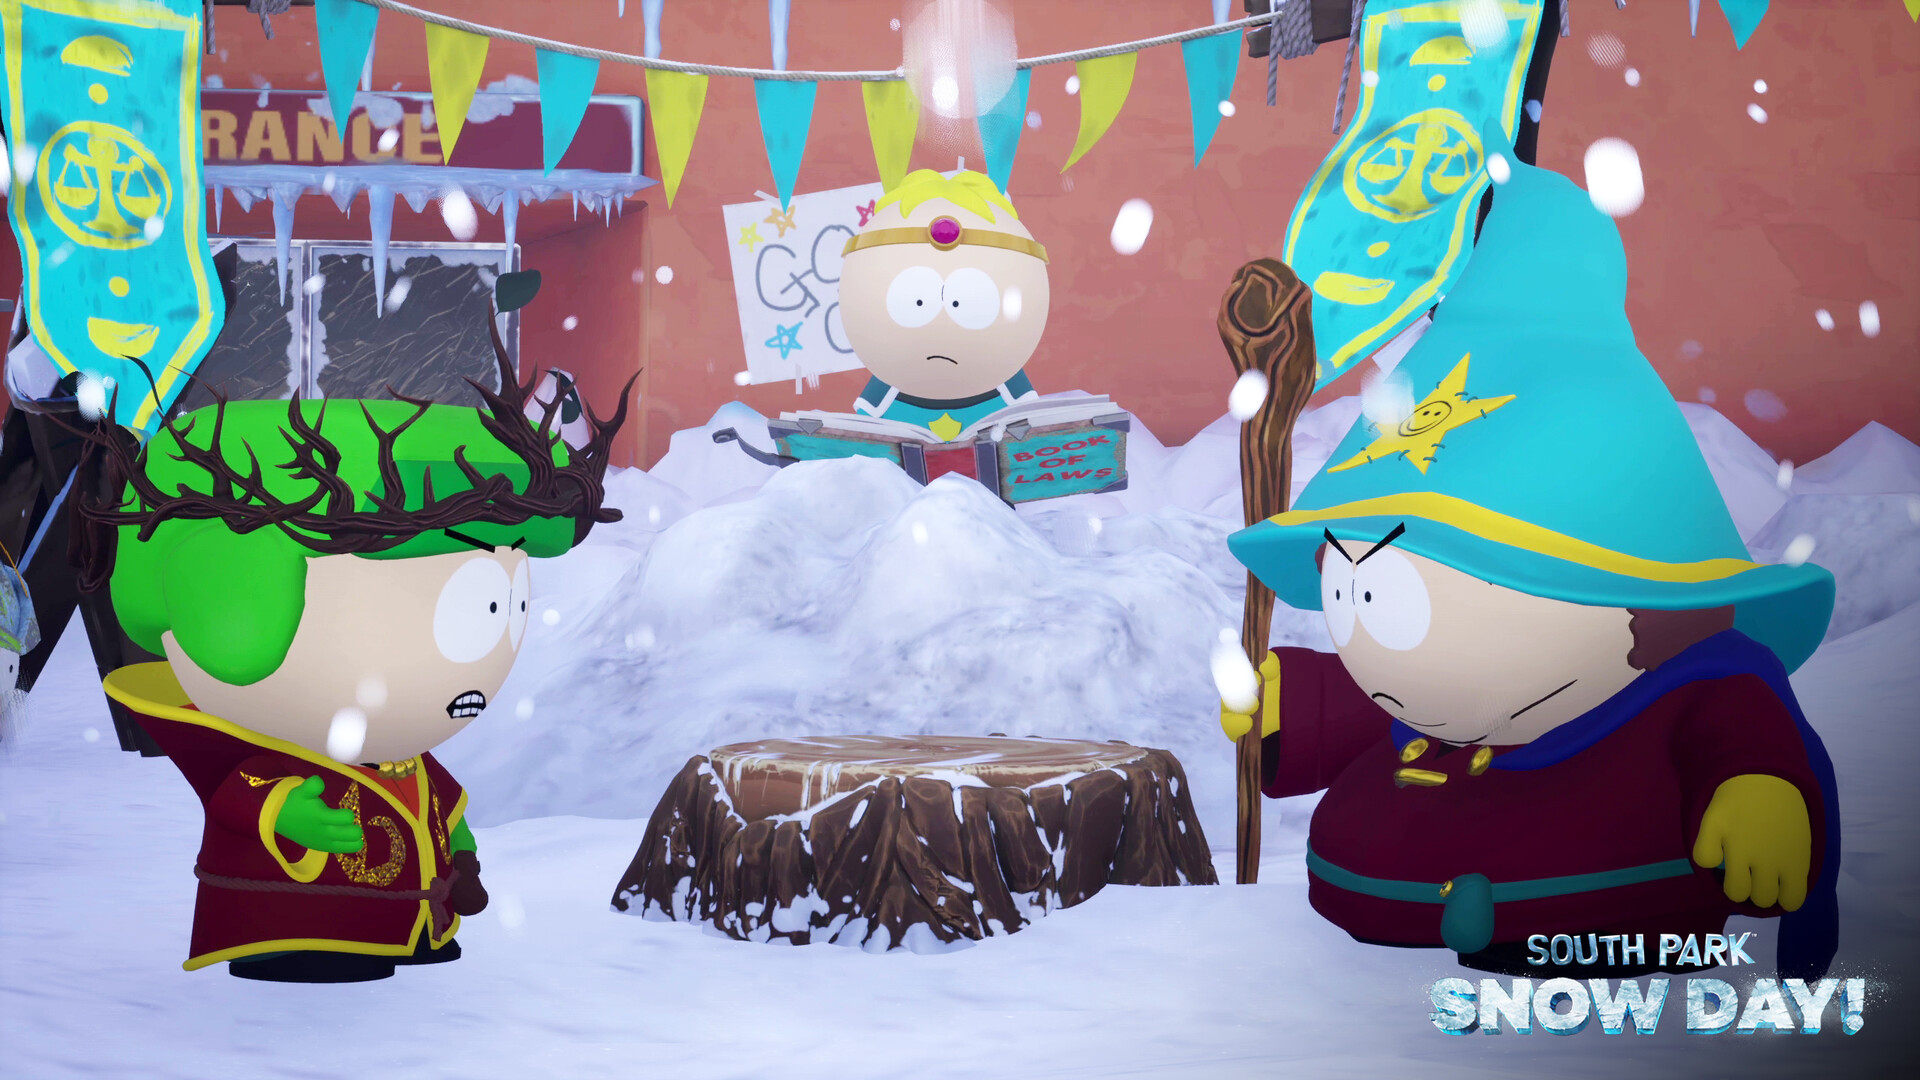 South Park: Snow Day! Digital Deluxe Edition Steam CD Key